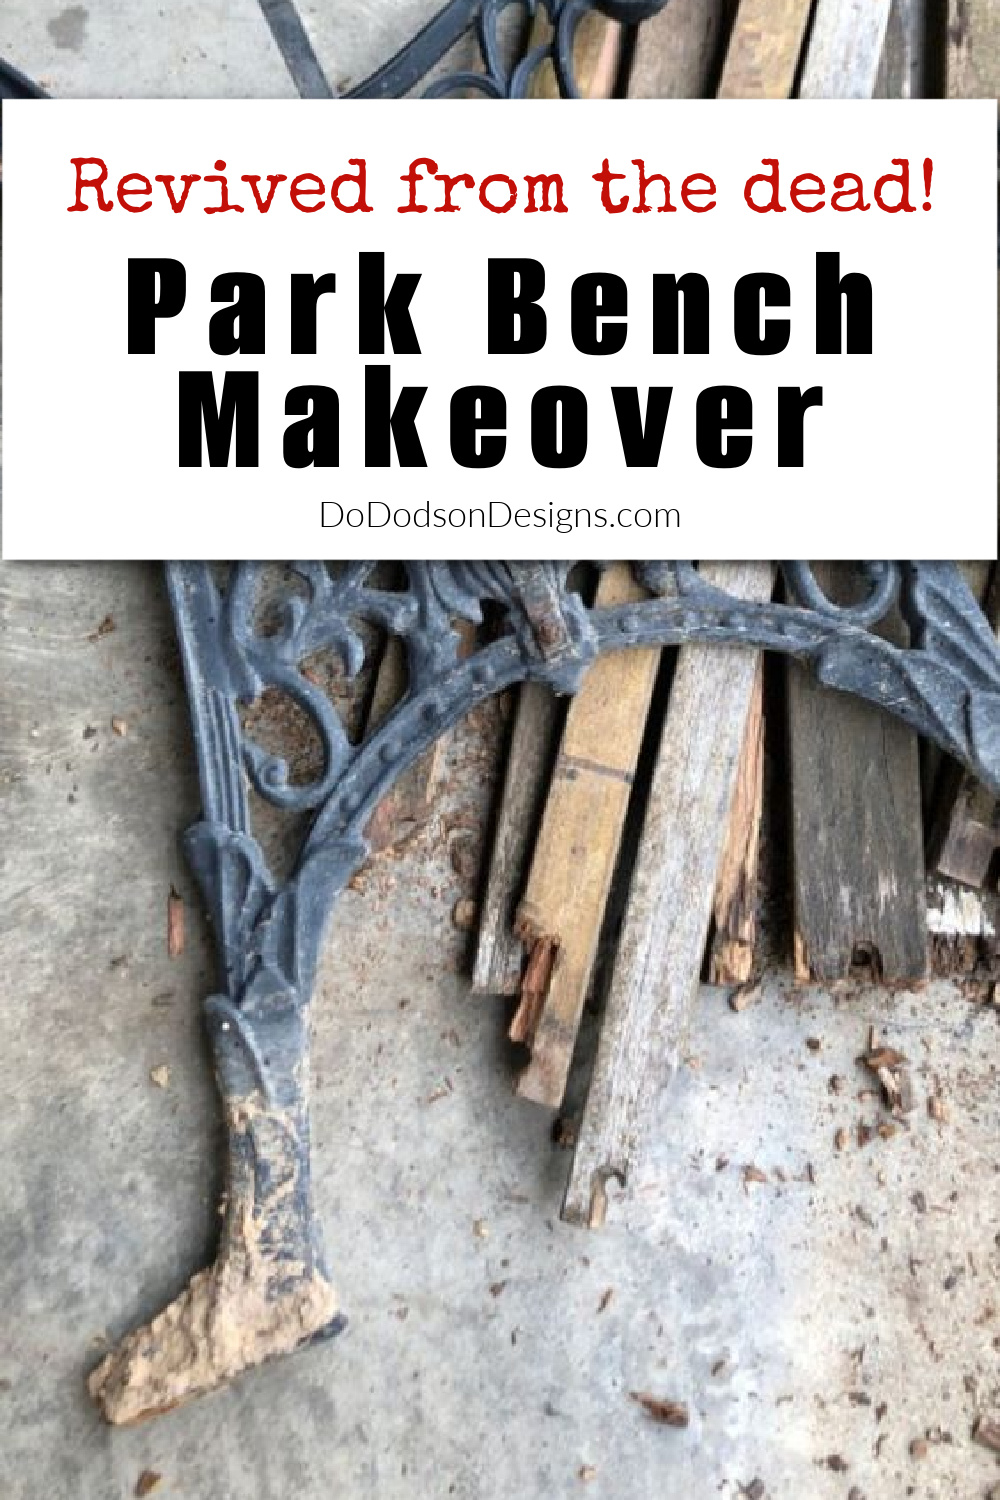 Park Bench Makeover-Upcycling Wrought Iron Outdoor Furniture